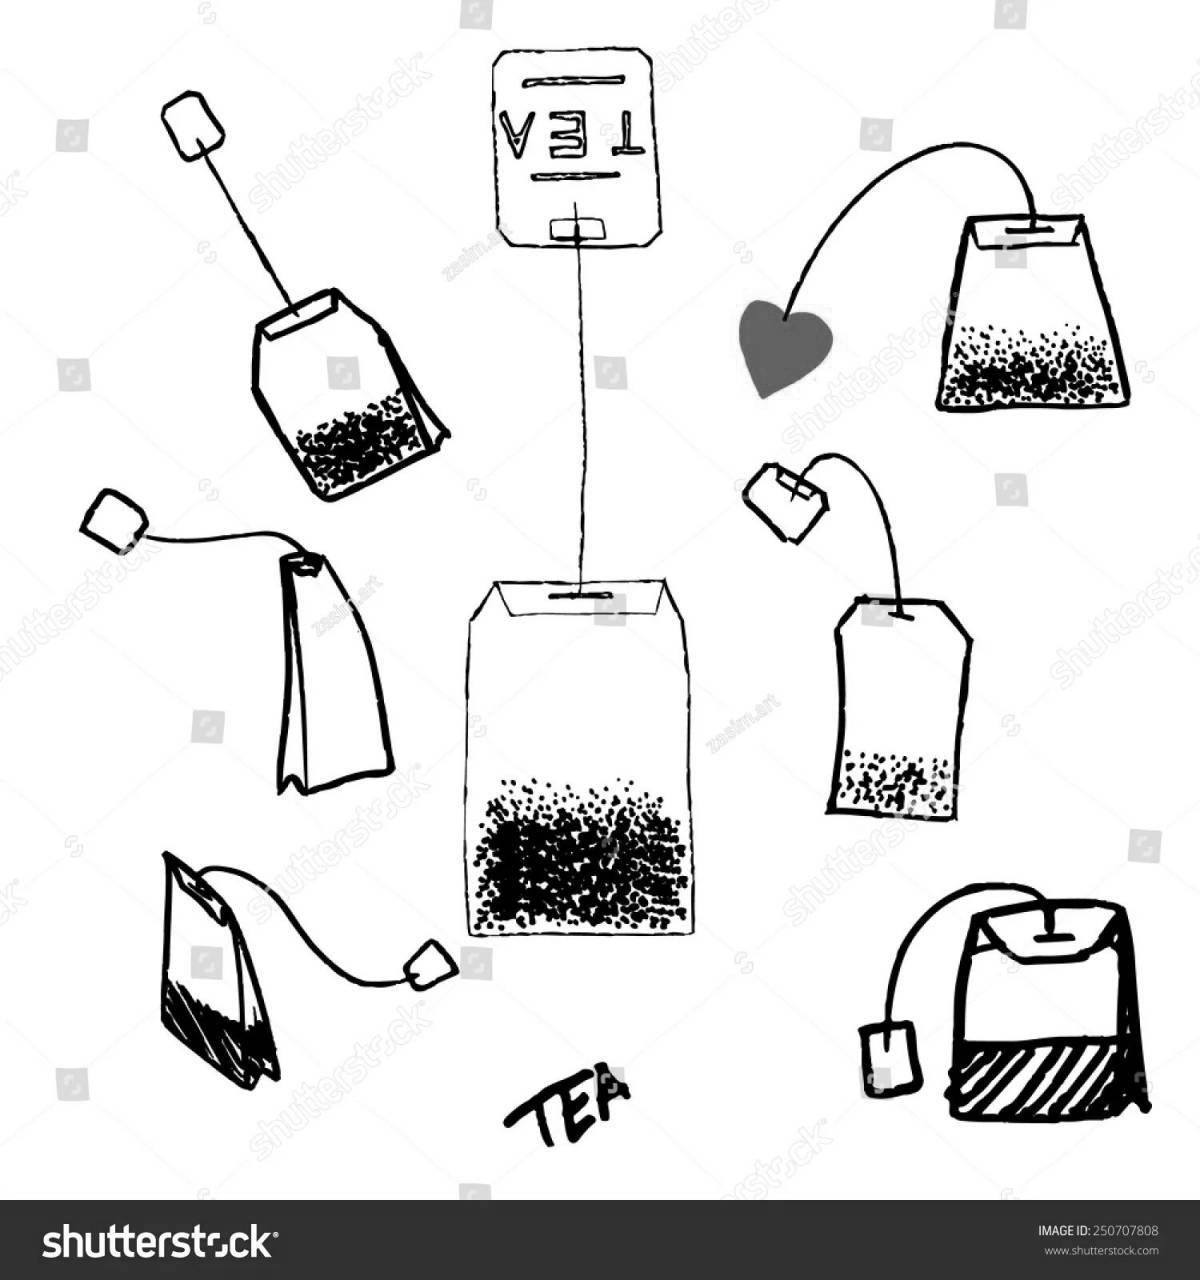 Great tea bag coloring page